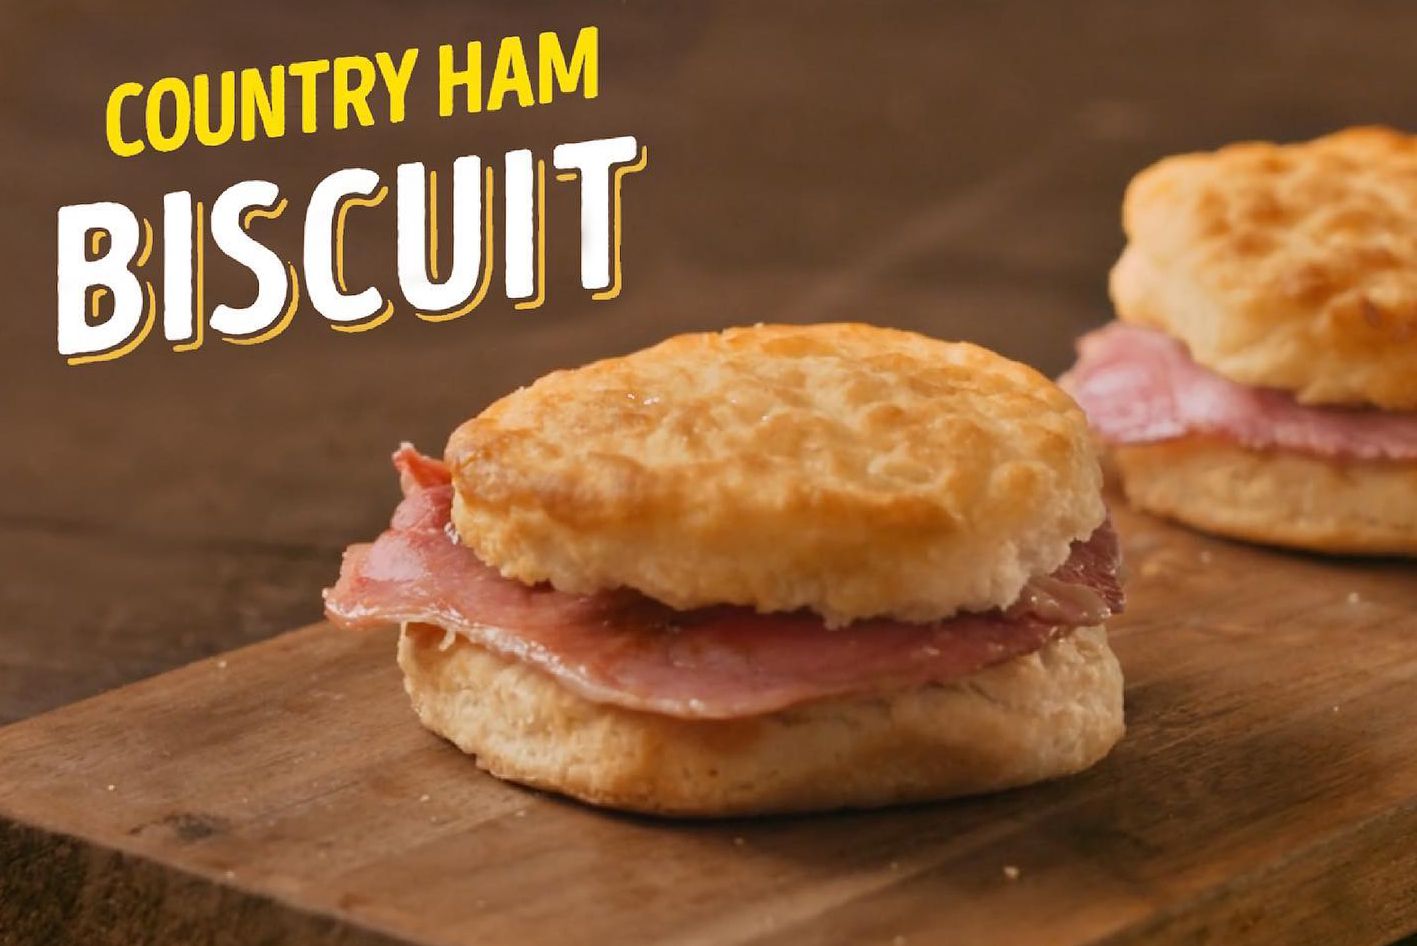 Enjoy a 2 for $5 Ham Biscuit Deal with In-restuarant Orders at Bojangles: A Rewards Exclusive